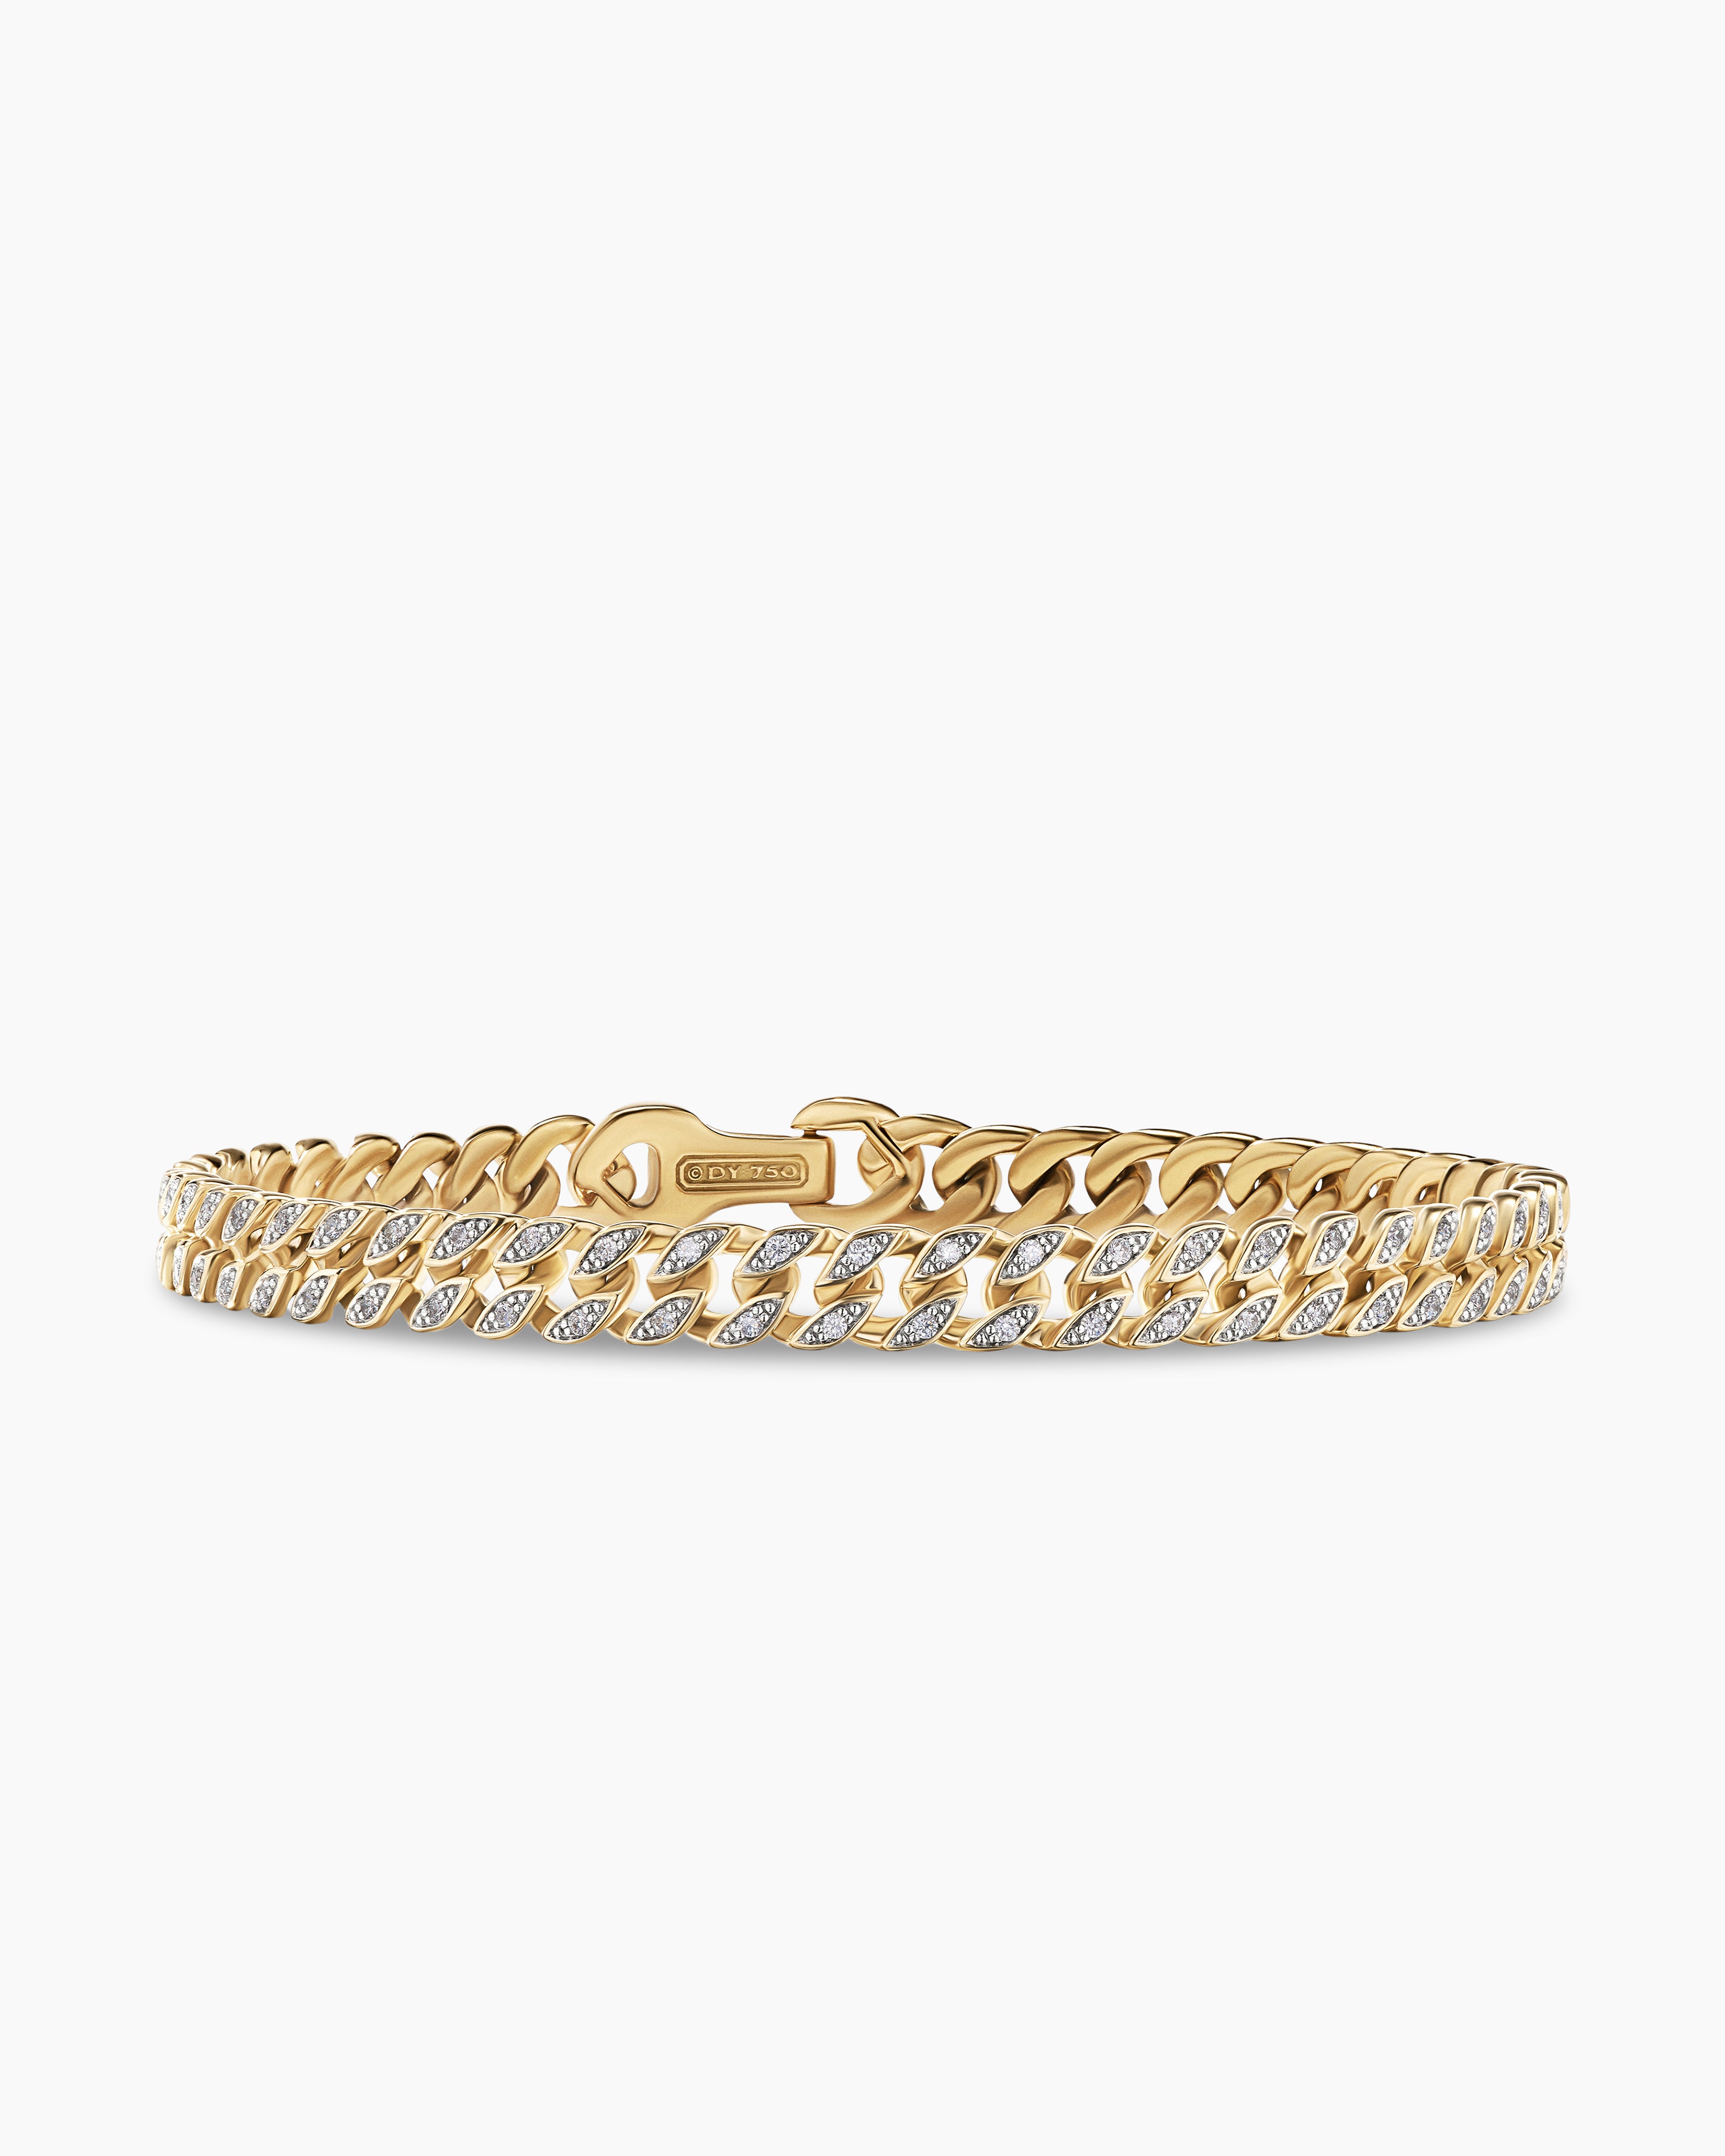 18ct Yellow Gold Cable Chain Bracelet